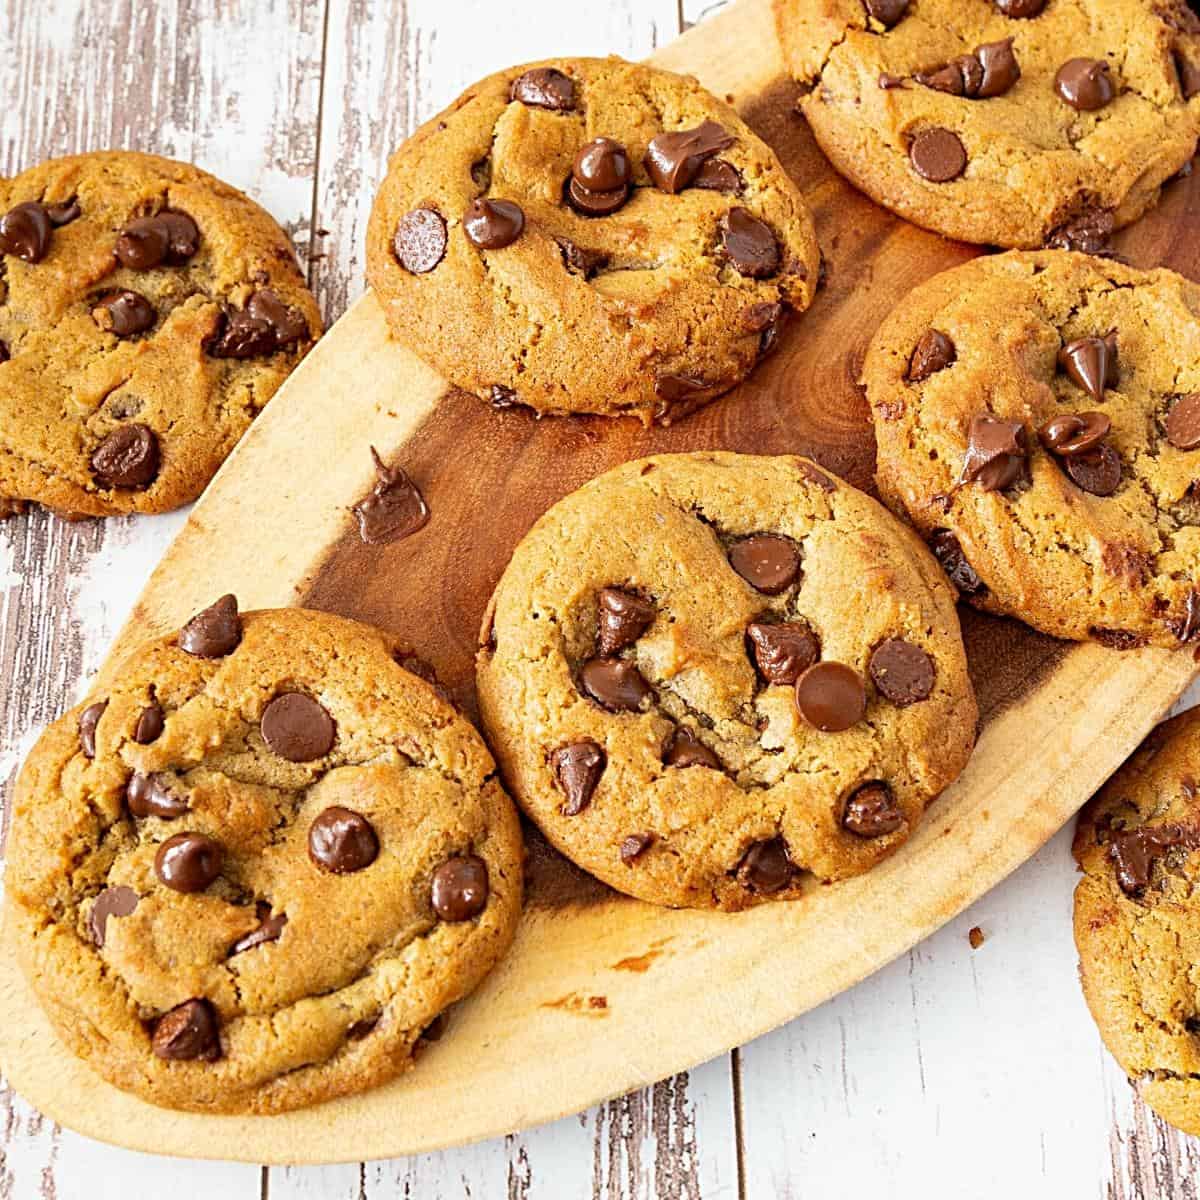 Chocolate chip cookies on a wooden board.